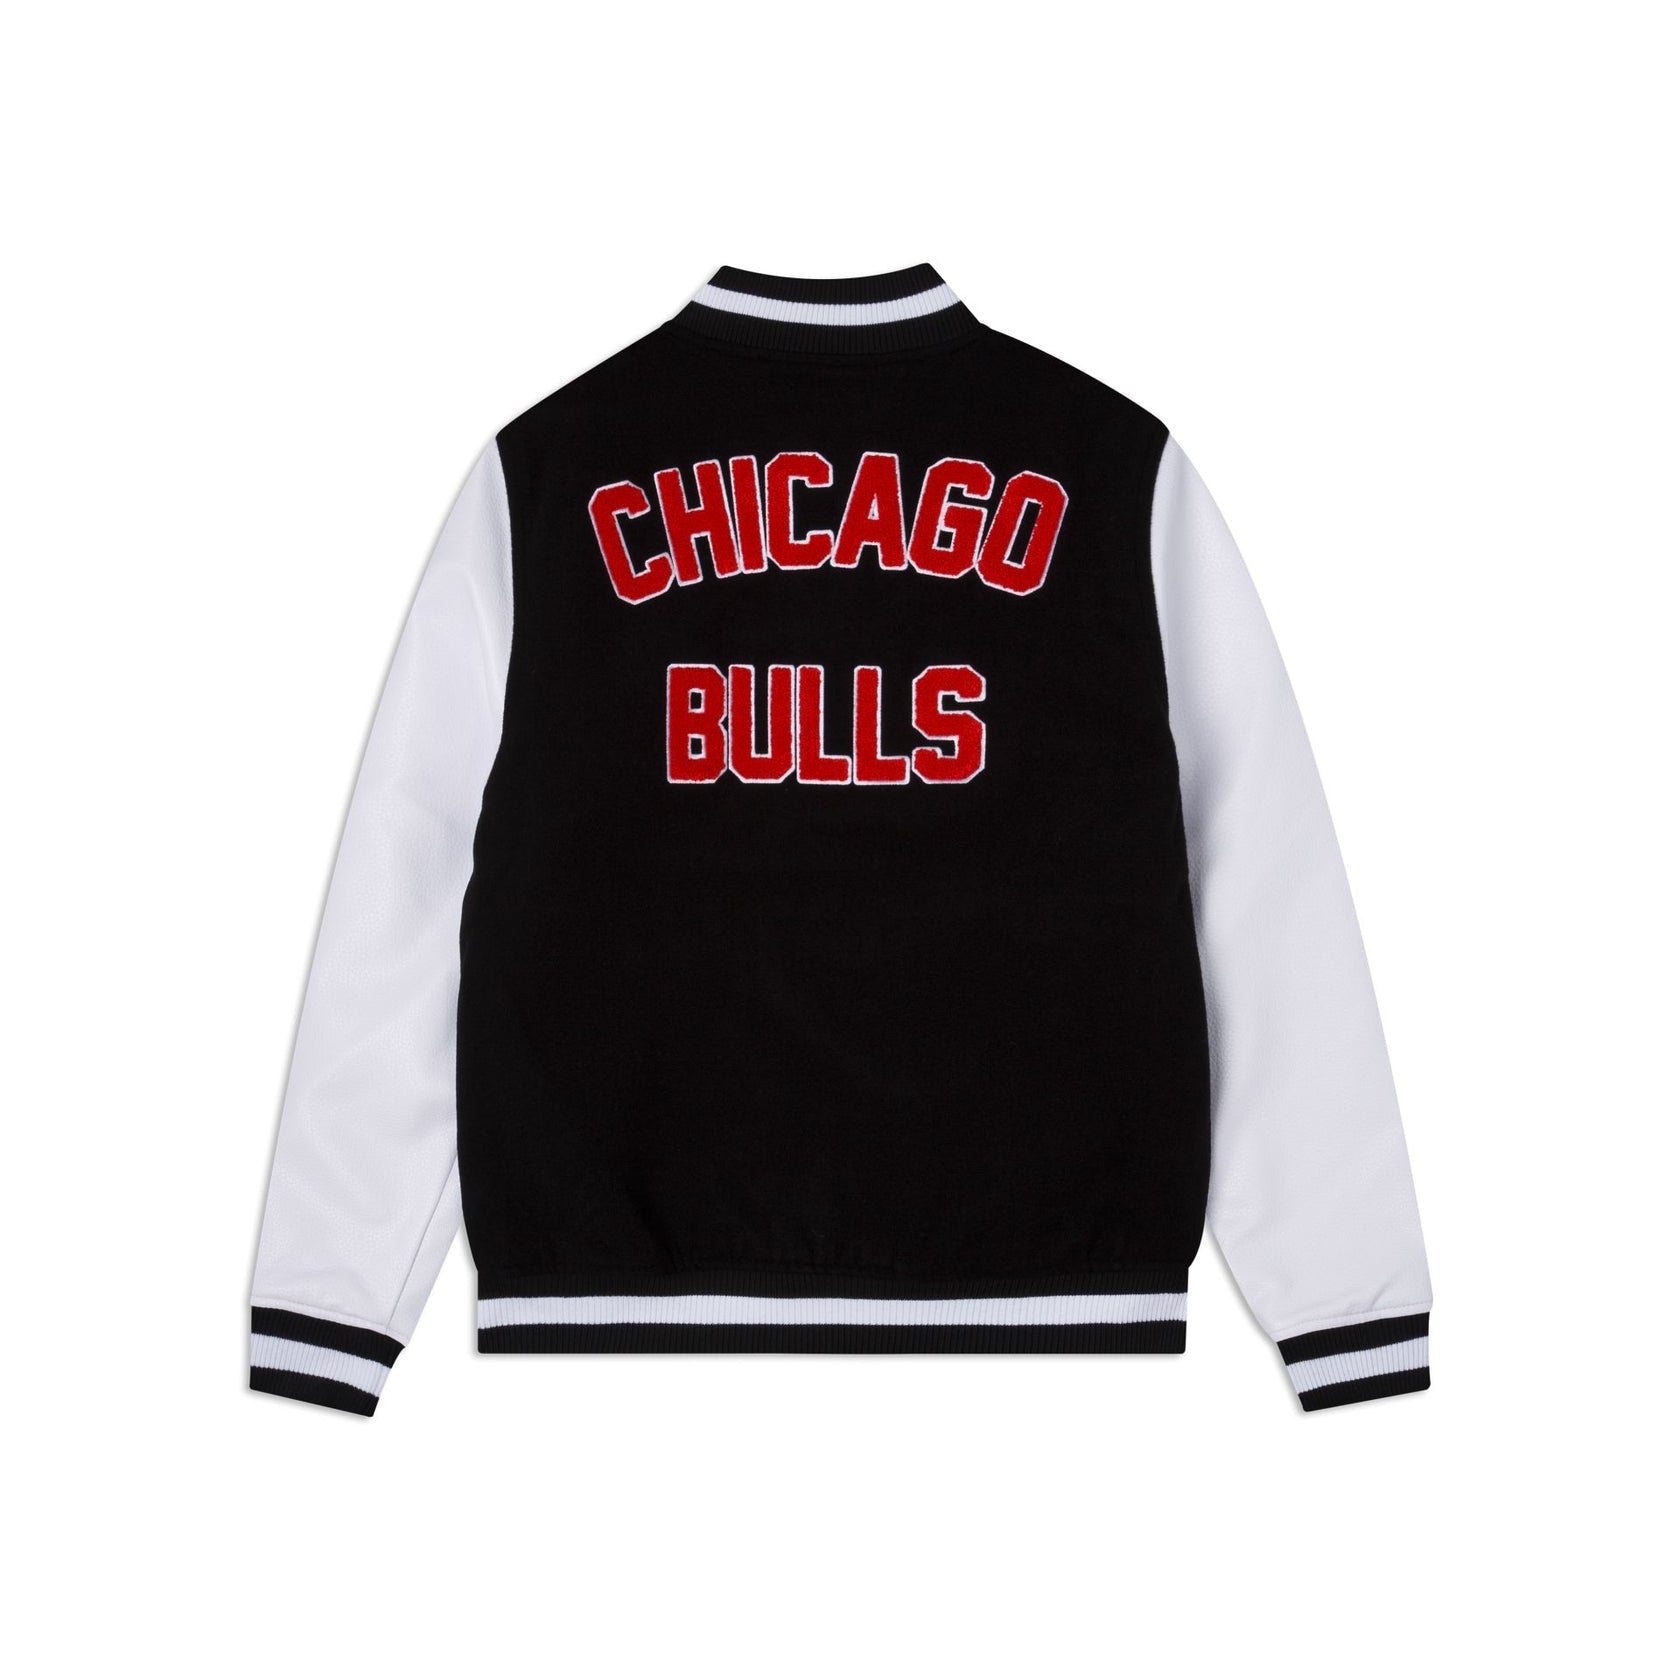 Chicago Bulls Long Sleeve Tee Free Shipping - The Vintage Twin